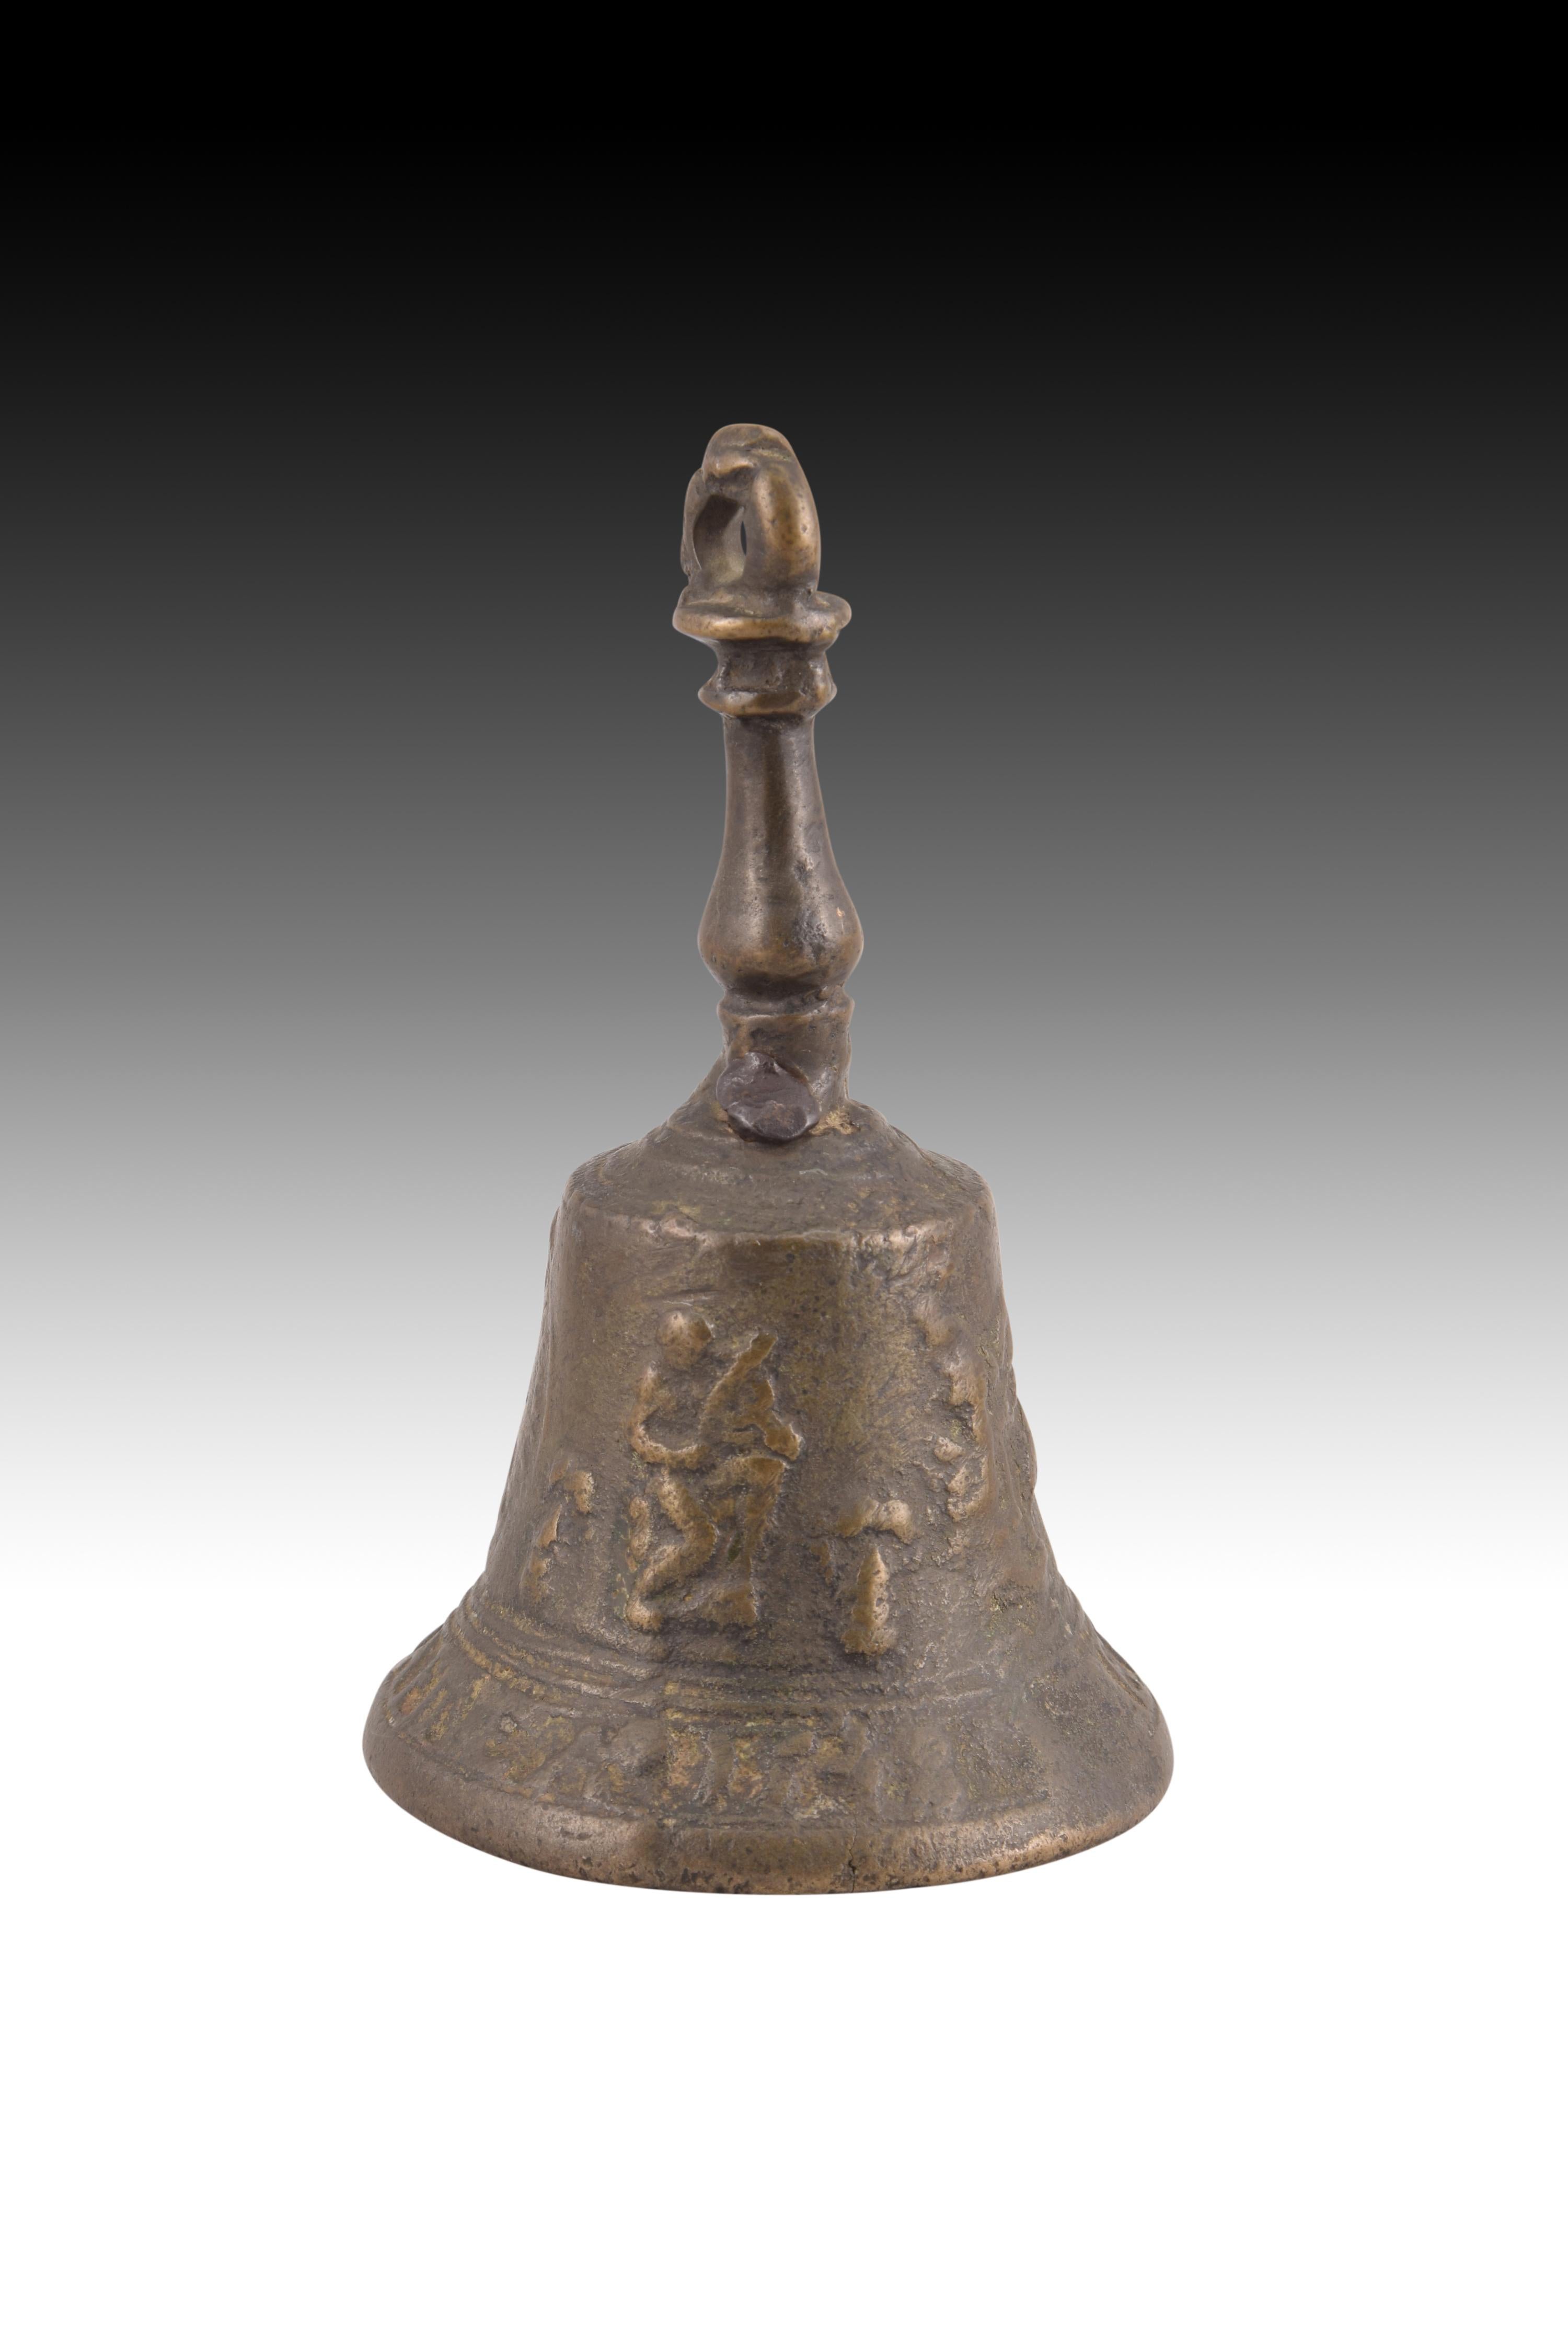 Flemish bell. Bronze. Century XVI. 
Bell with clapper made of bronze and decorated with plant and figurative elements on the body of the same, located on an inscription in Latin and capital letters that follows the most common models in these